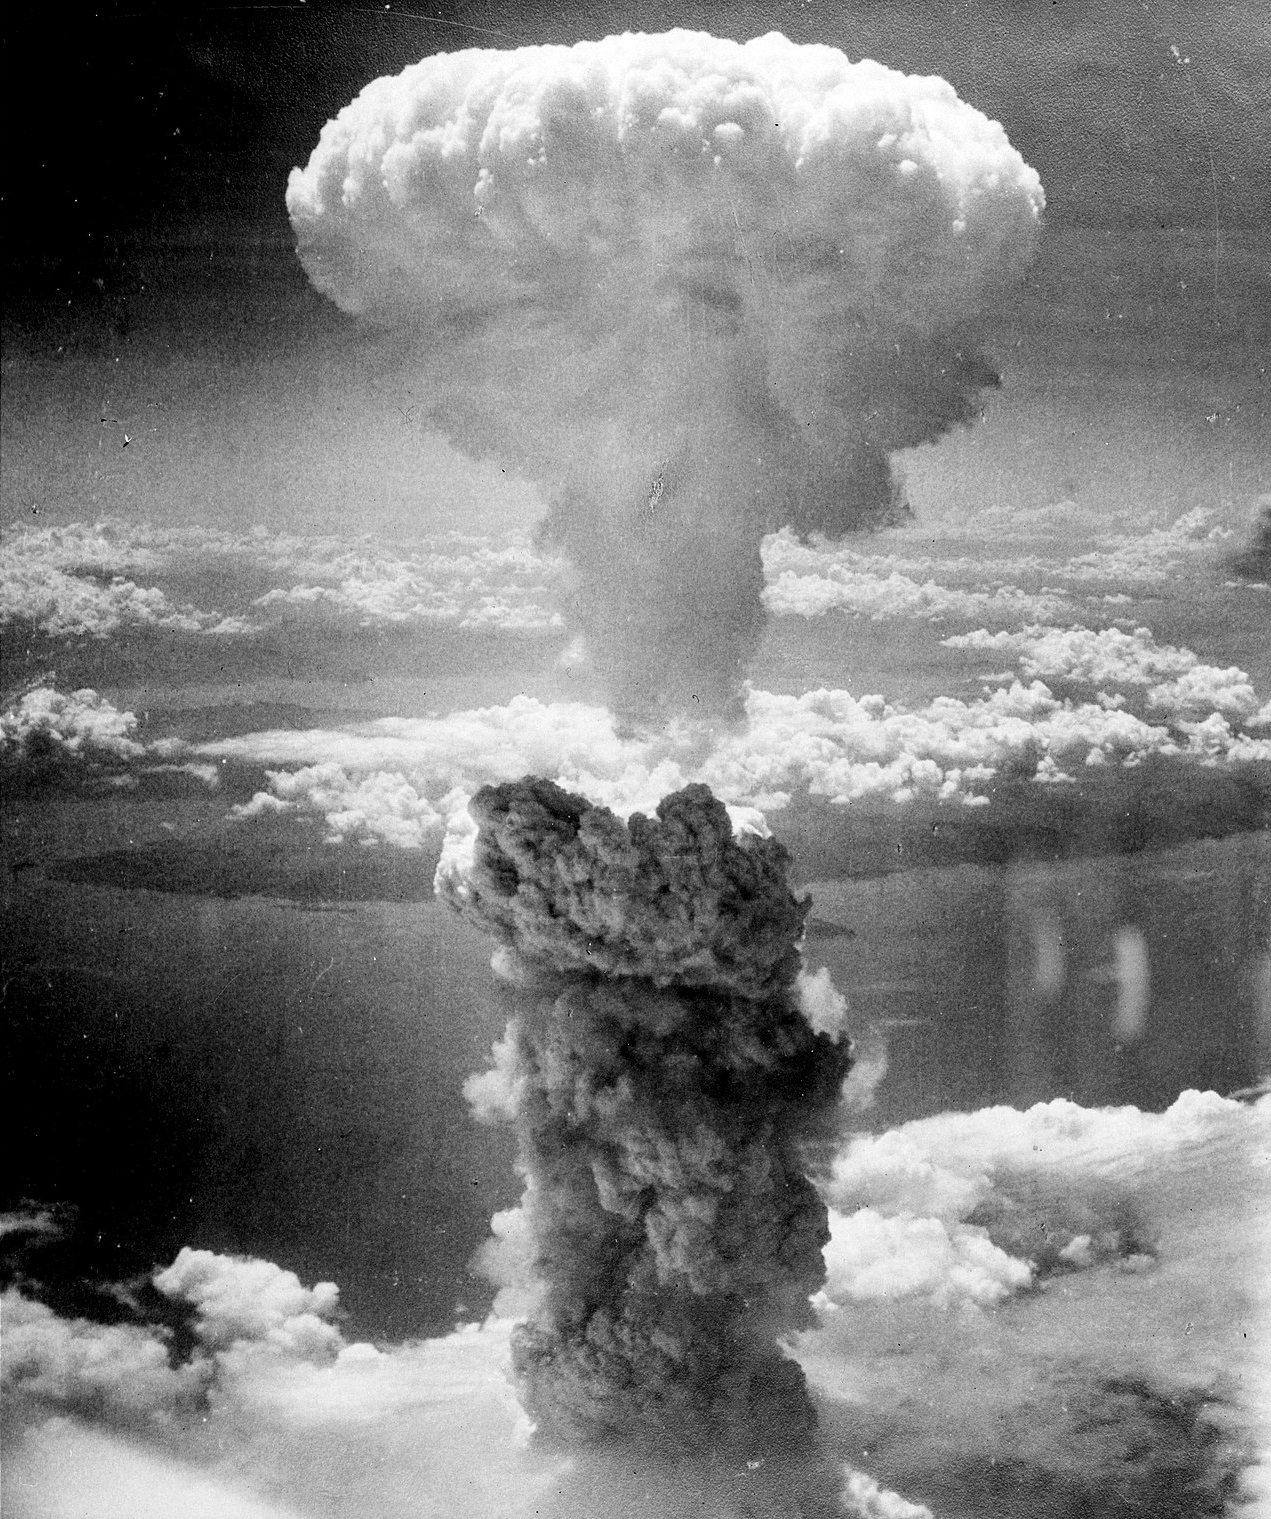 Black and white photo of a mushroom cloud resulting from atomic bomb explosion